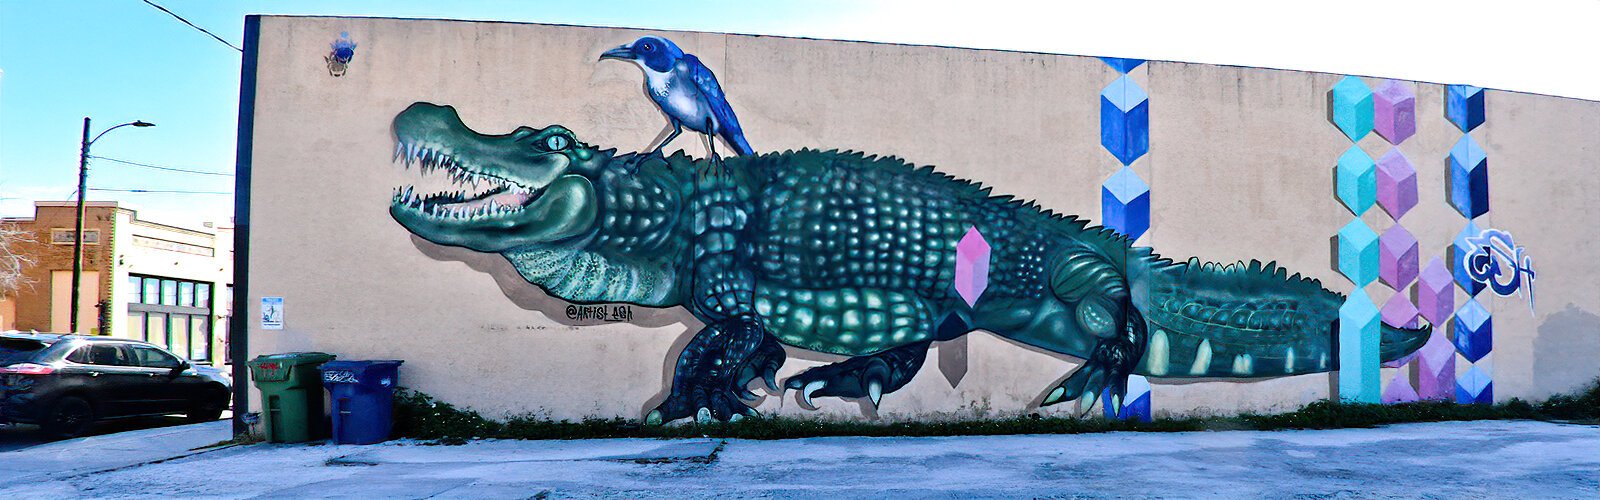 Tampa artist Eric "Esh" Hornsby created this alligator mural in Tampa Heights.